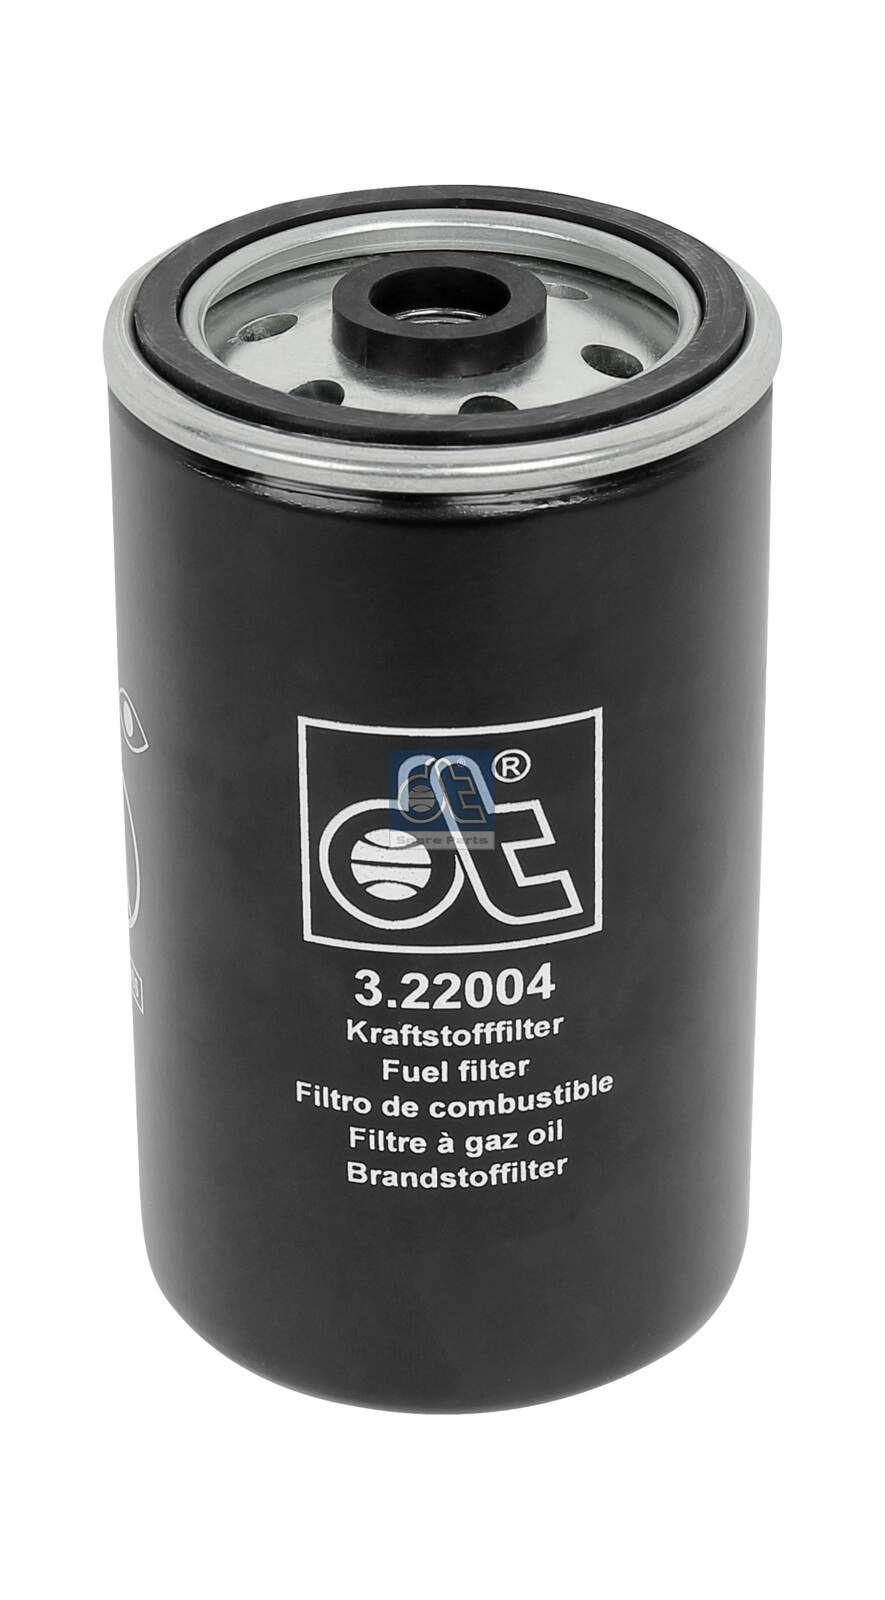 WDK 724/1 DT Spare Parts 3.22004 Fuel filter 51.12503.0039